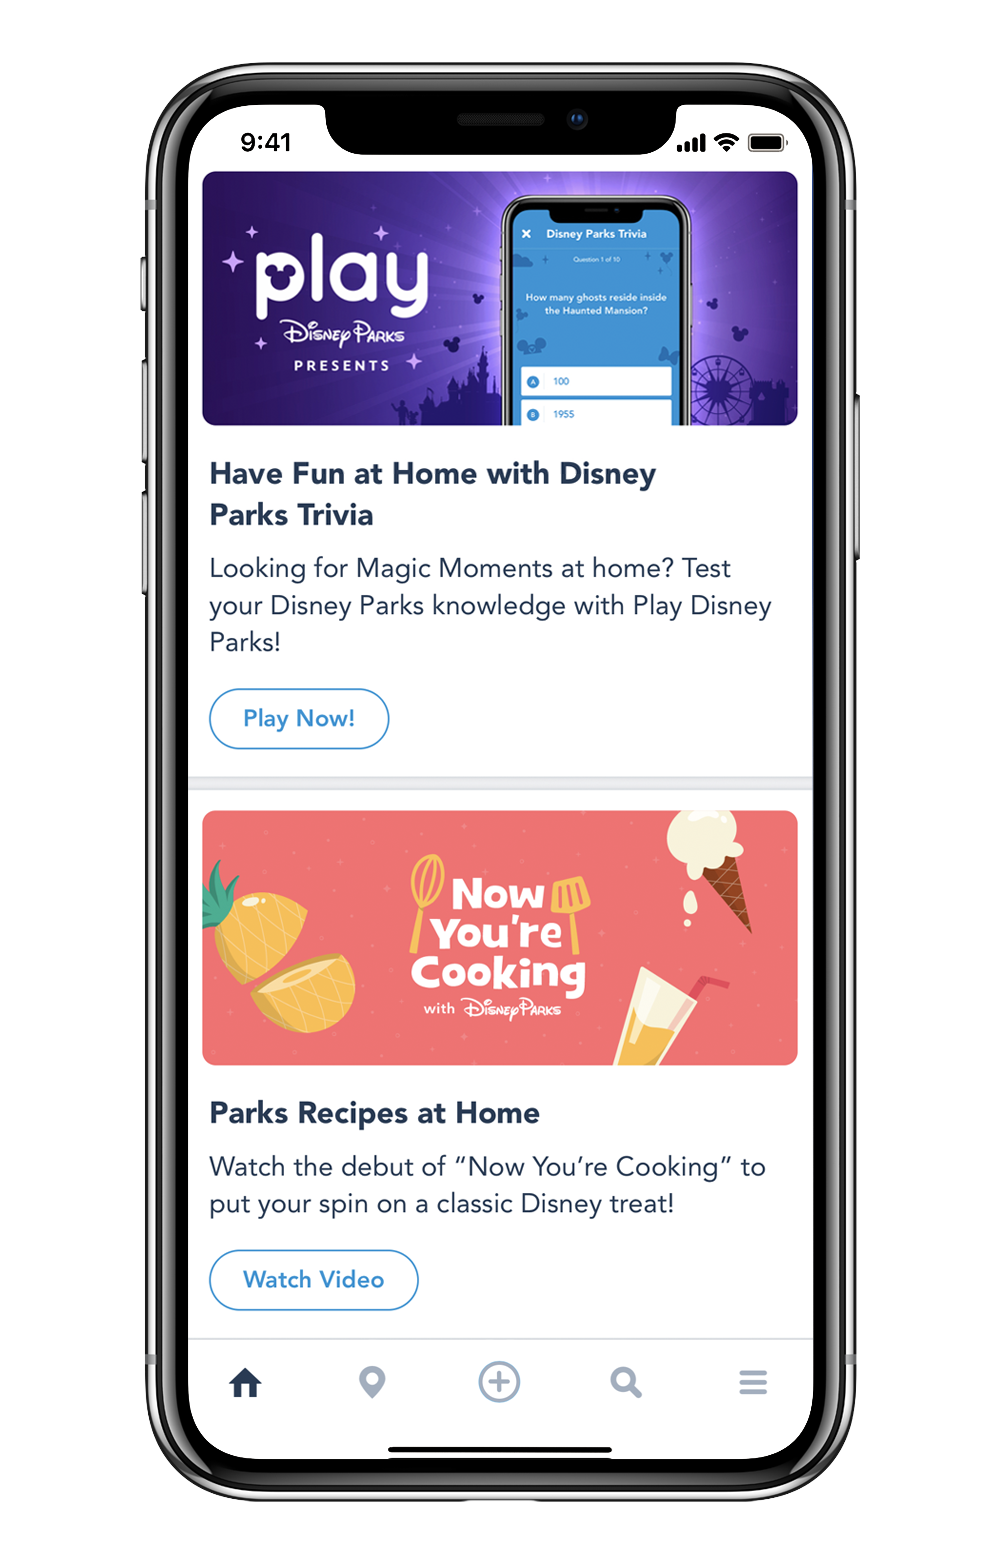 Enjoy Disney Parks Recipes, Jungle Cruise Jokes and More with New